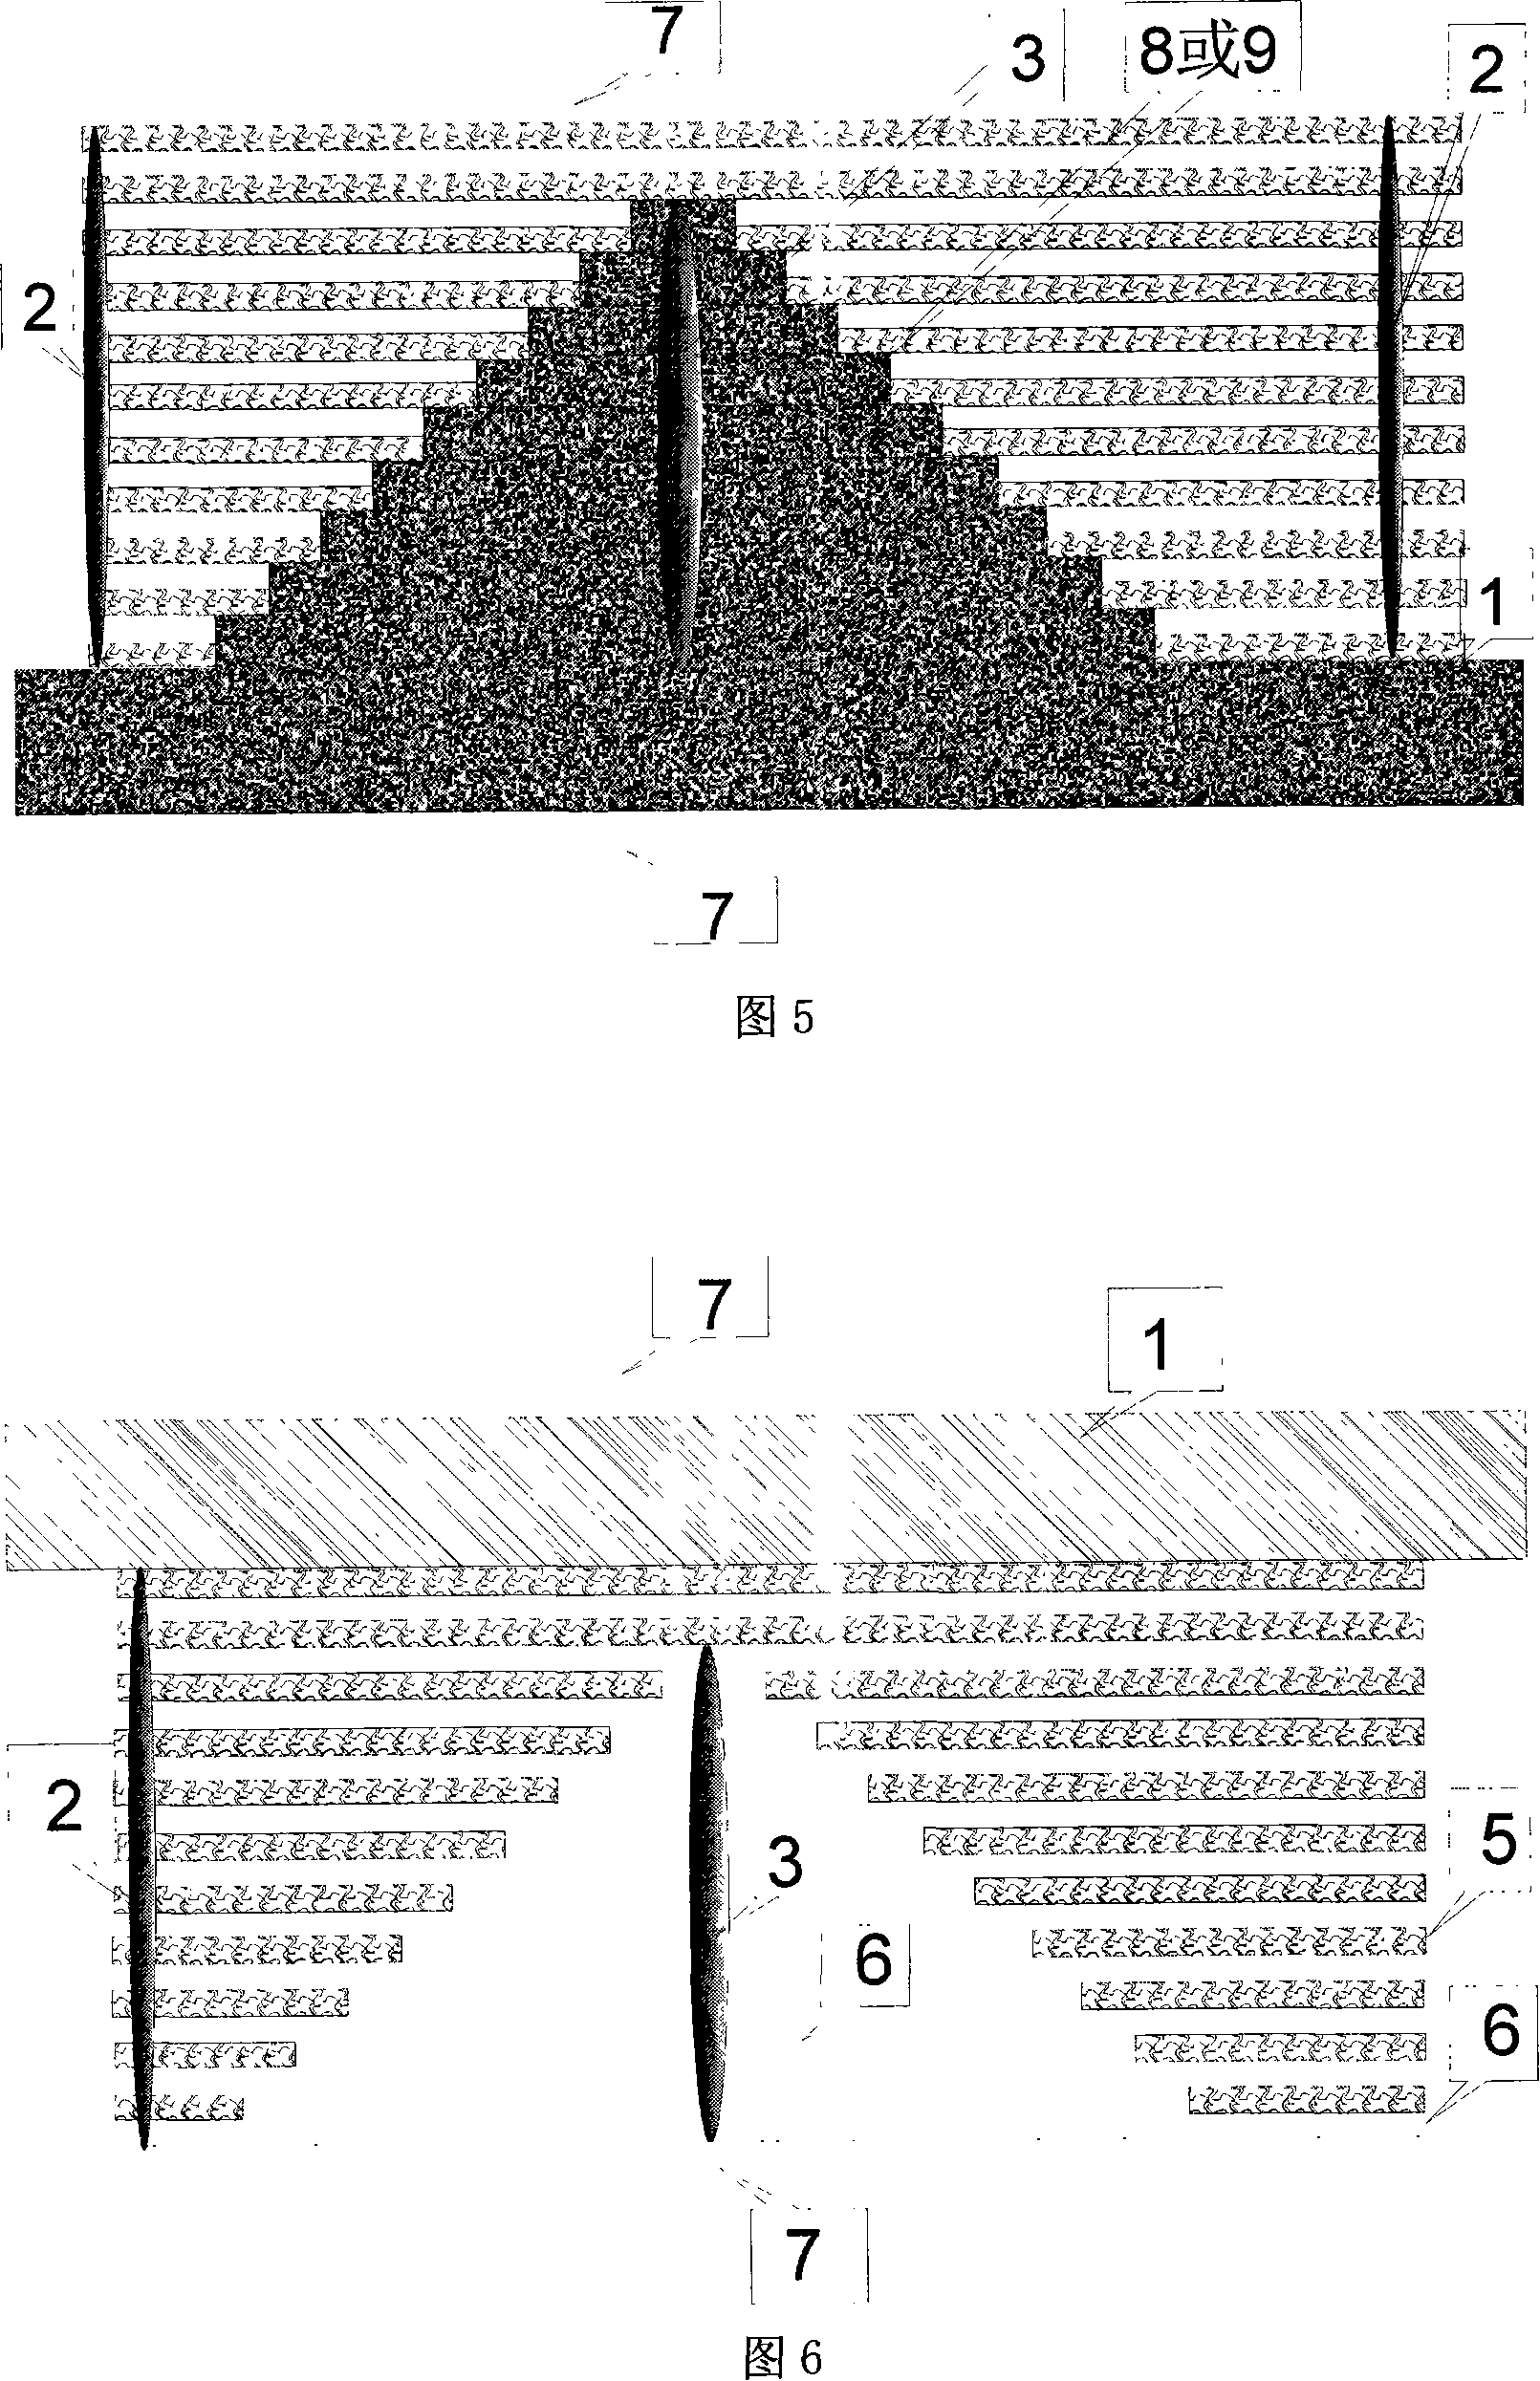 Dielectric-coating structure reflecting mirror used for chirp pulse amplification optical spectrum shaping